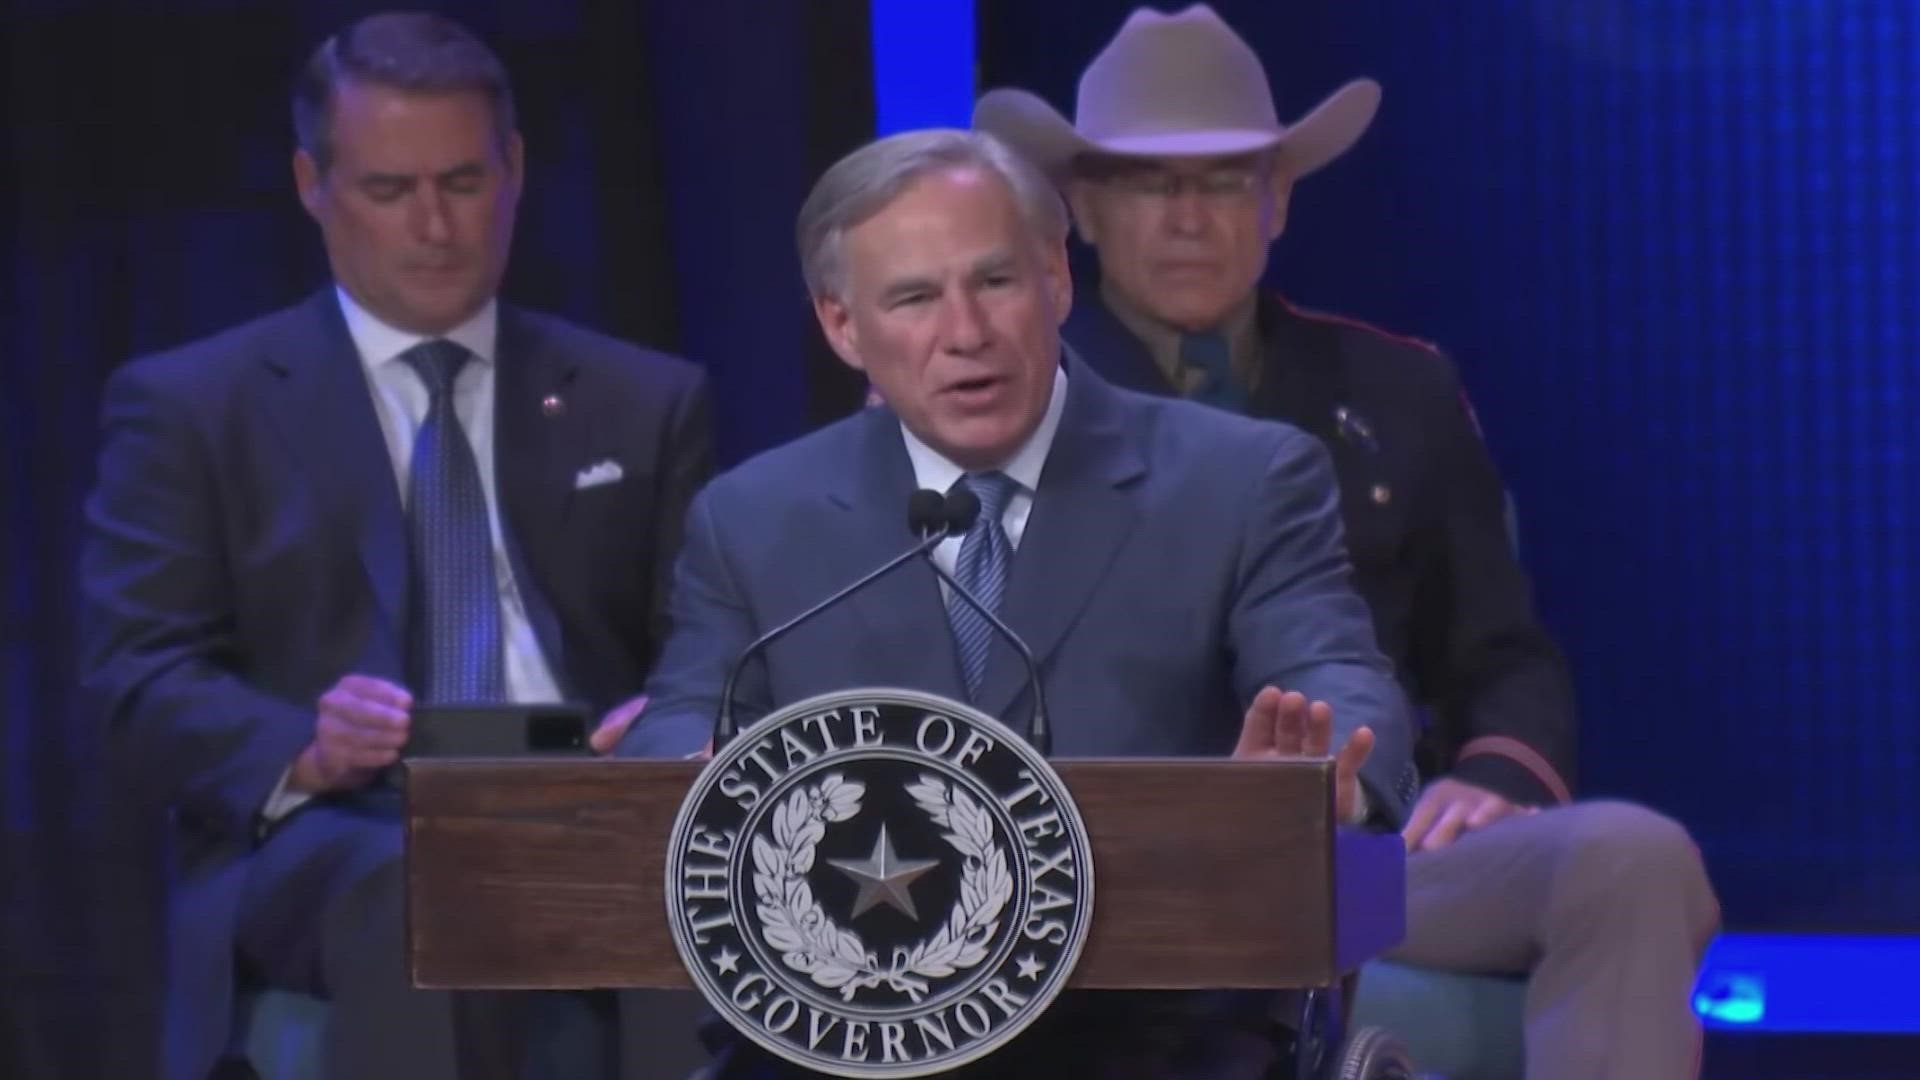 Governor Abbott wants DPS troopers to pull people over they suspect are in the country illegally.